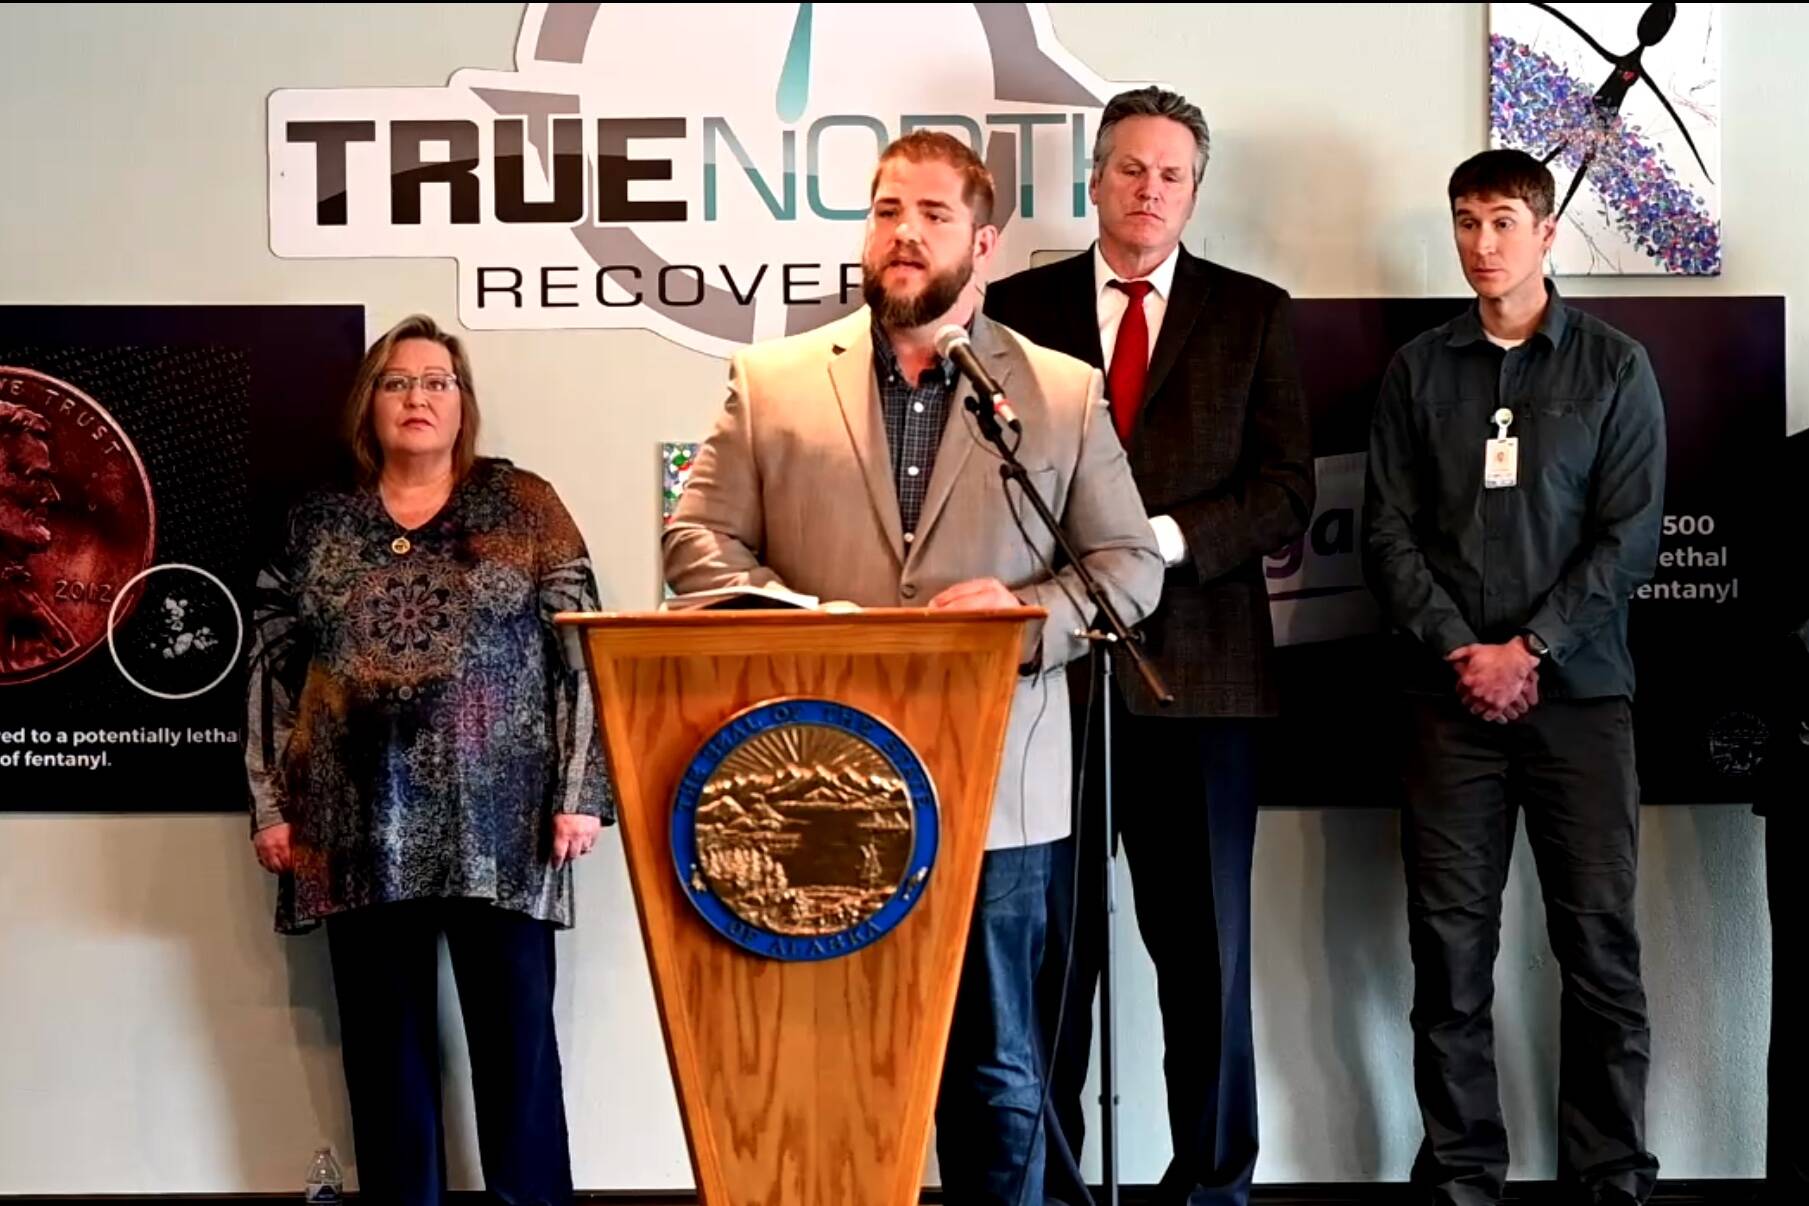 Department of Health and Social Services Commissioner Adam Crum, speaks at a news conference with Gov. Mike Dunleavy about the state's efforts to combat the increase in drug overdoses driven by the synthetic opioid fentanyl, on Tuesday, May 3, 2022. (Screenshot)